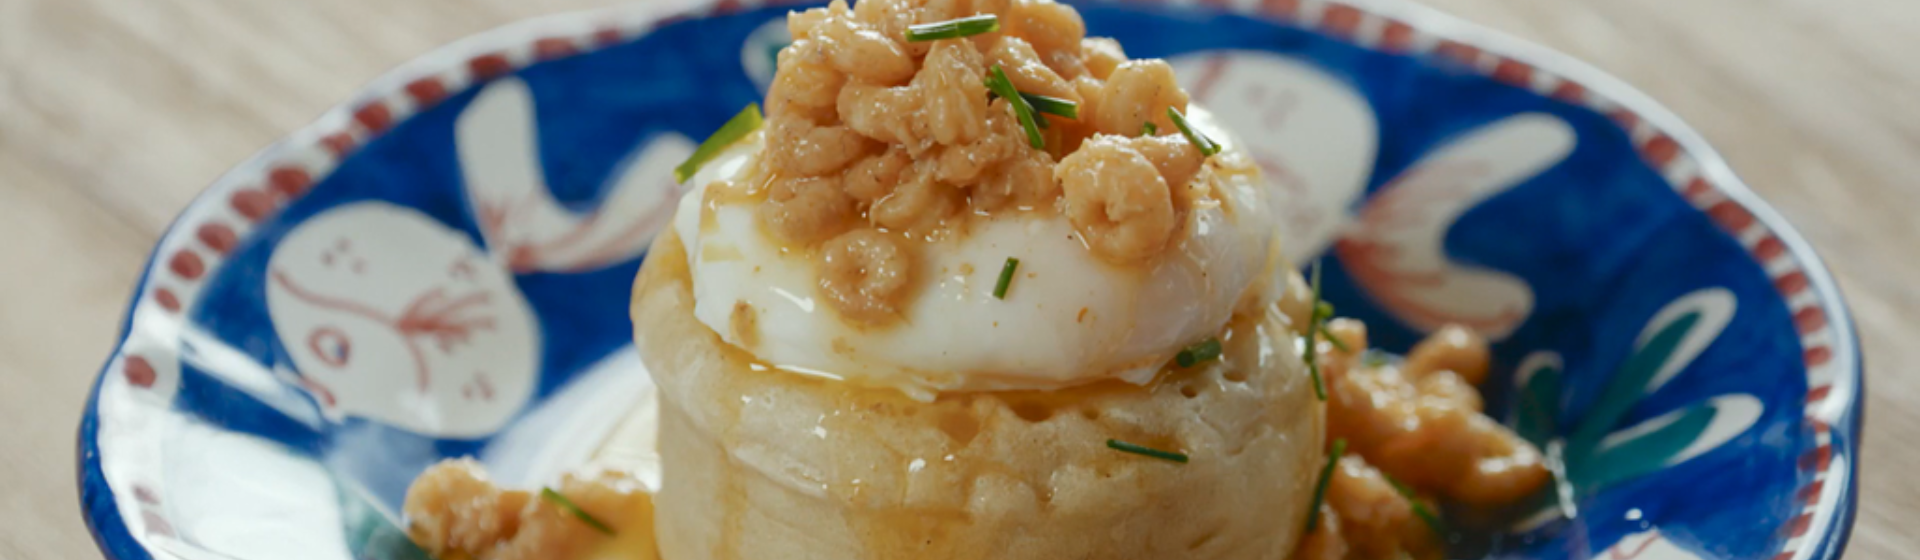 Crumpets with potted shrimp recipe - Rick Stein Food Stories